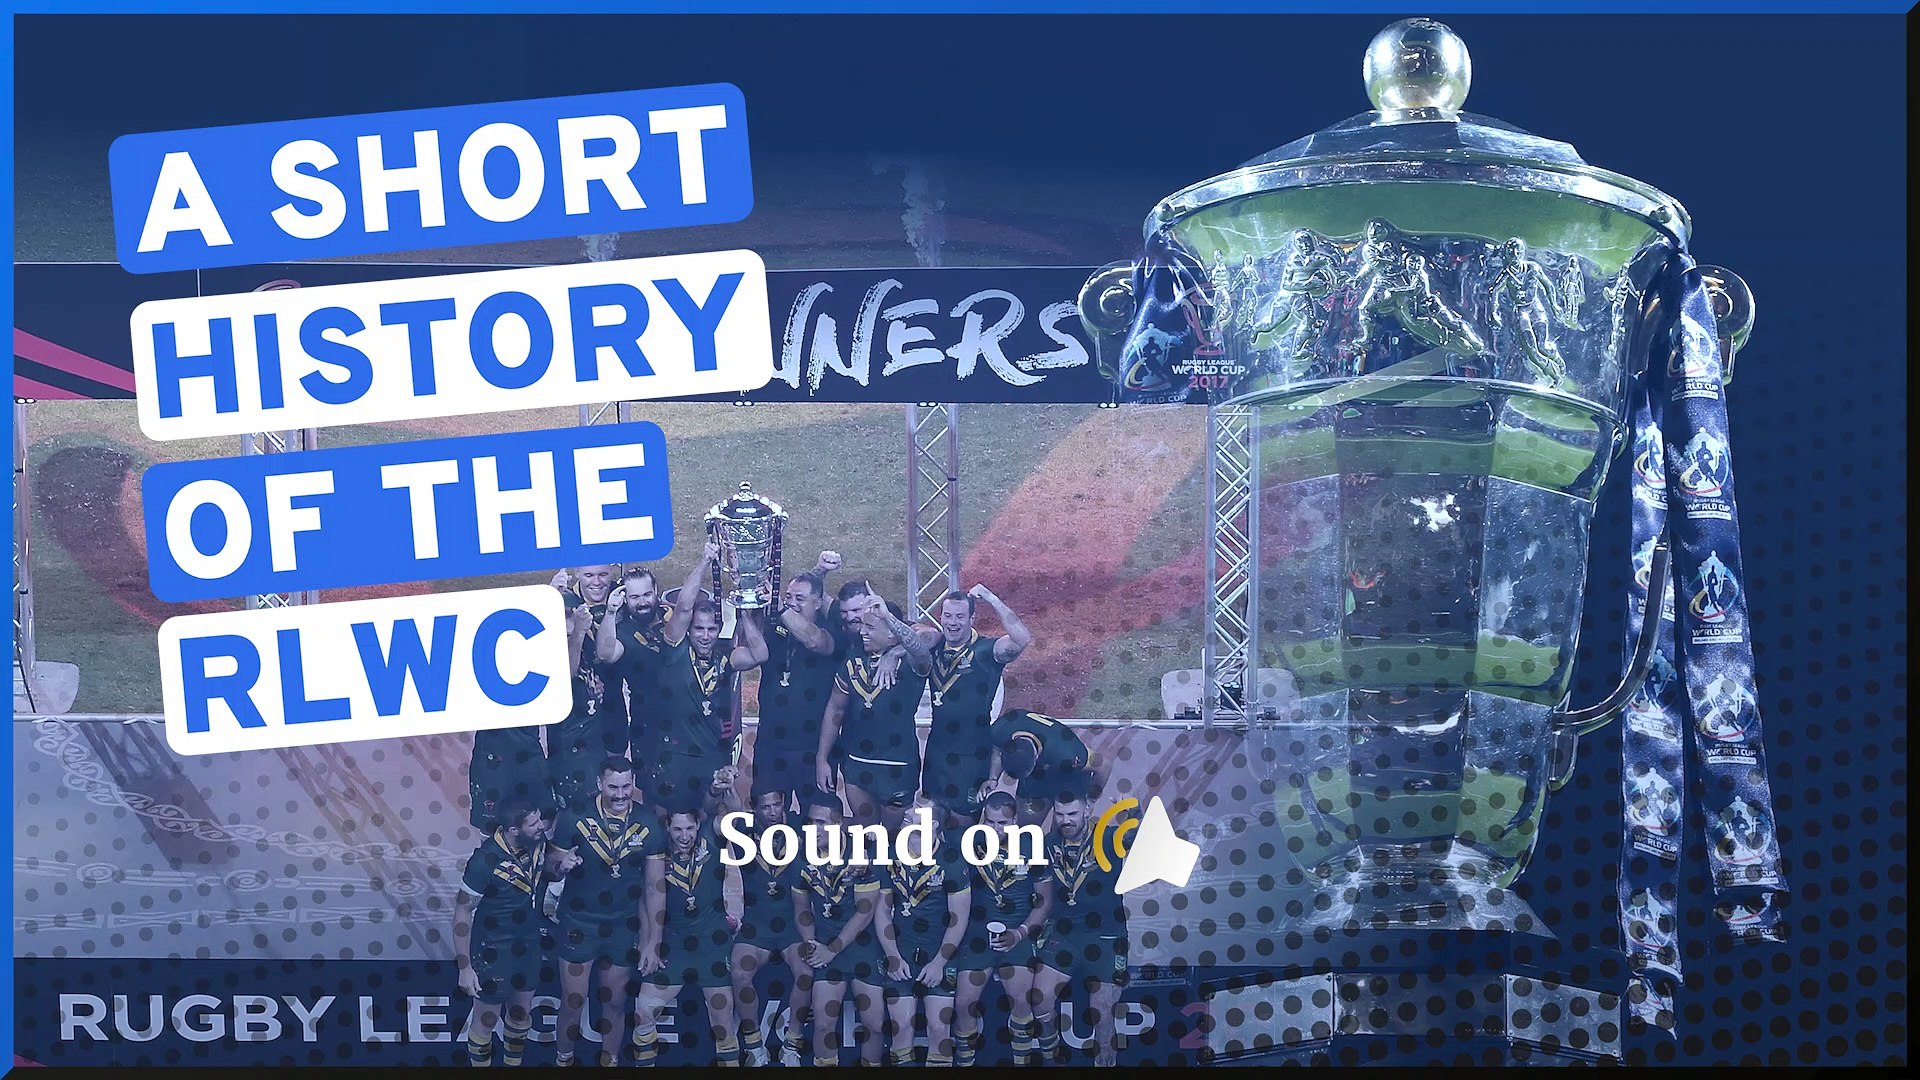 A short history of the Rugby League World Cup